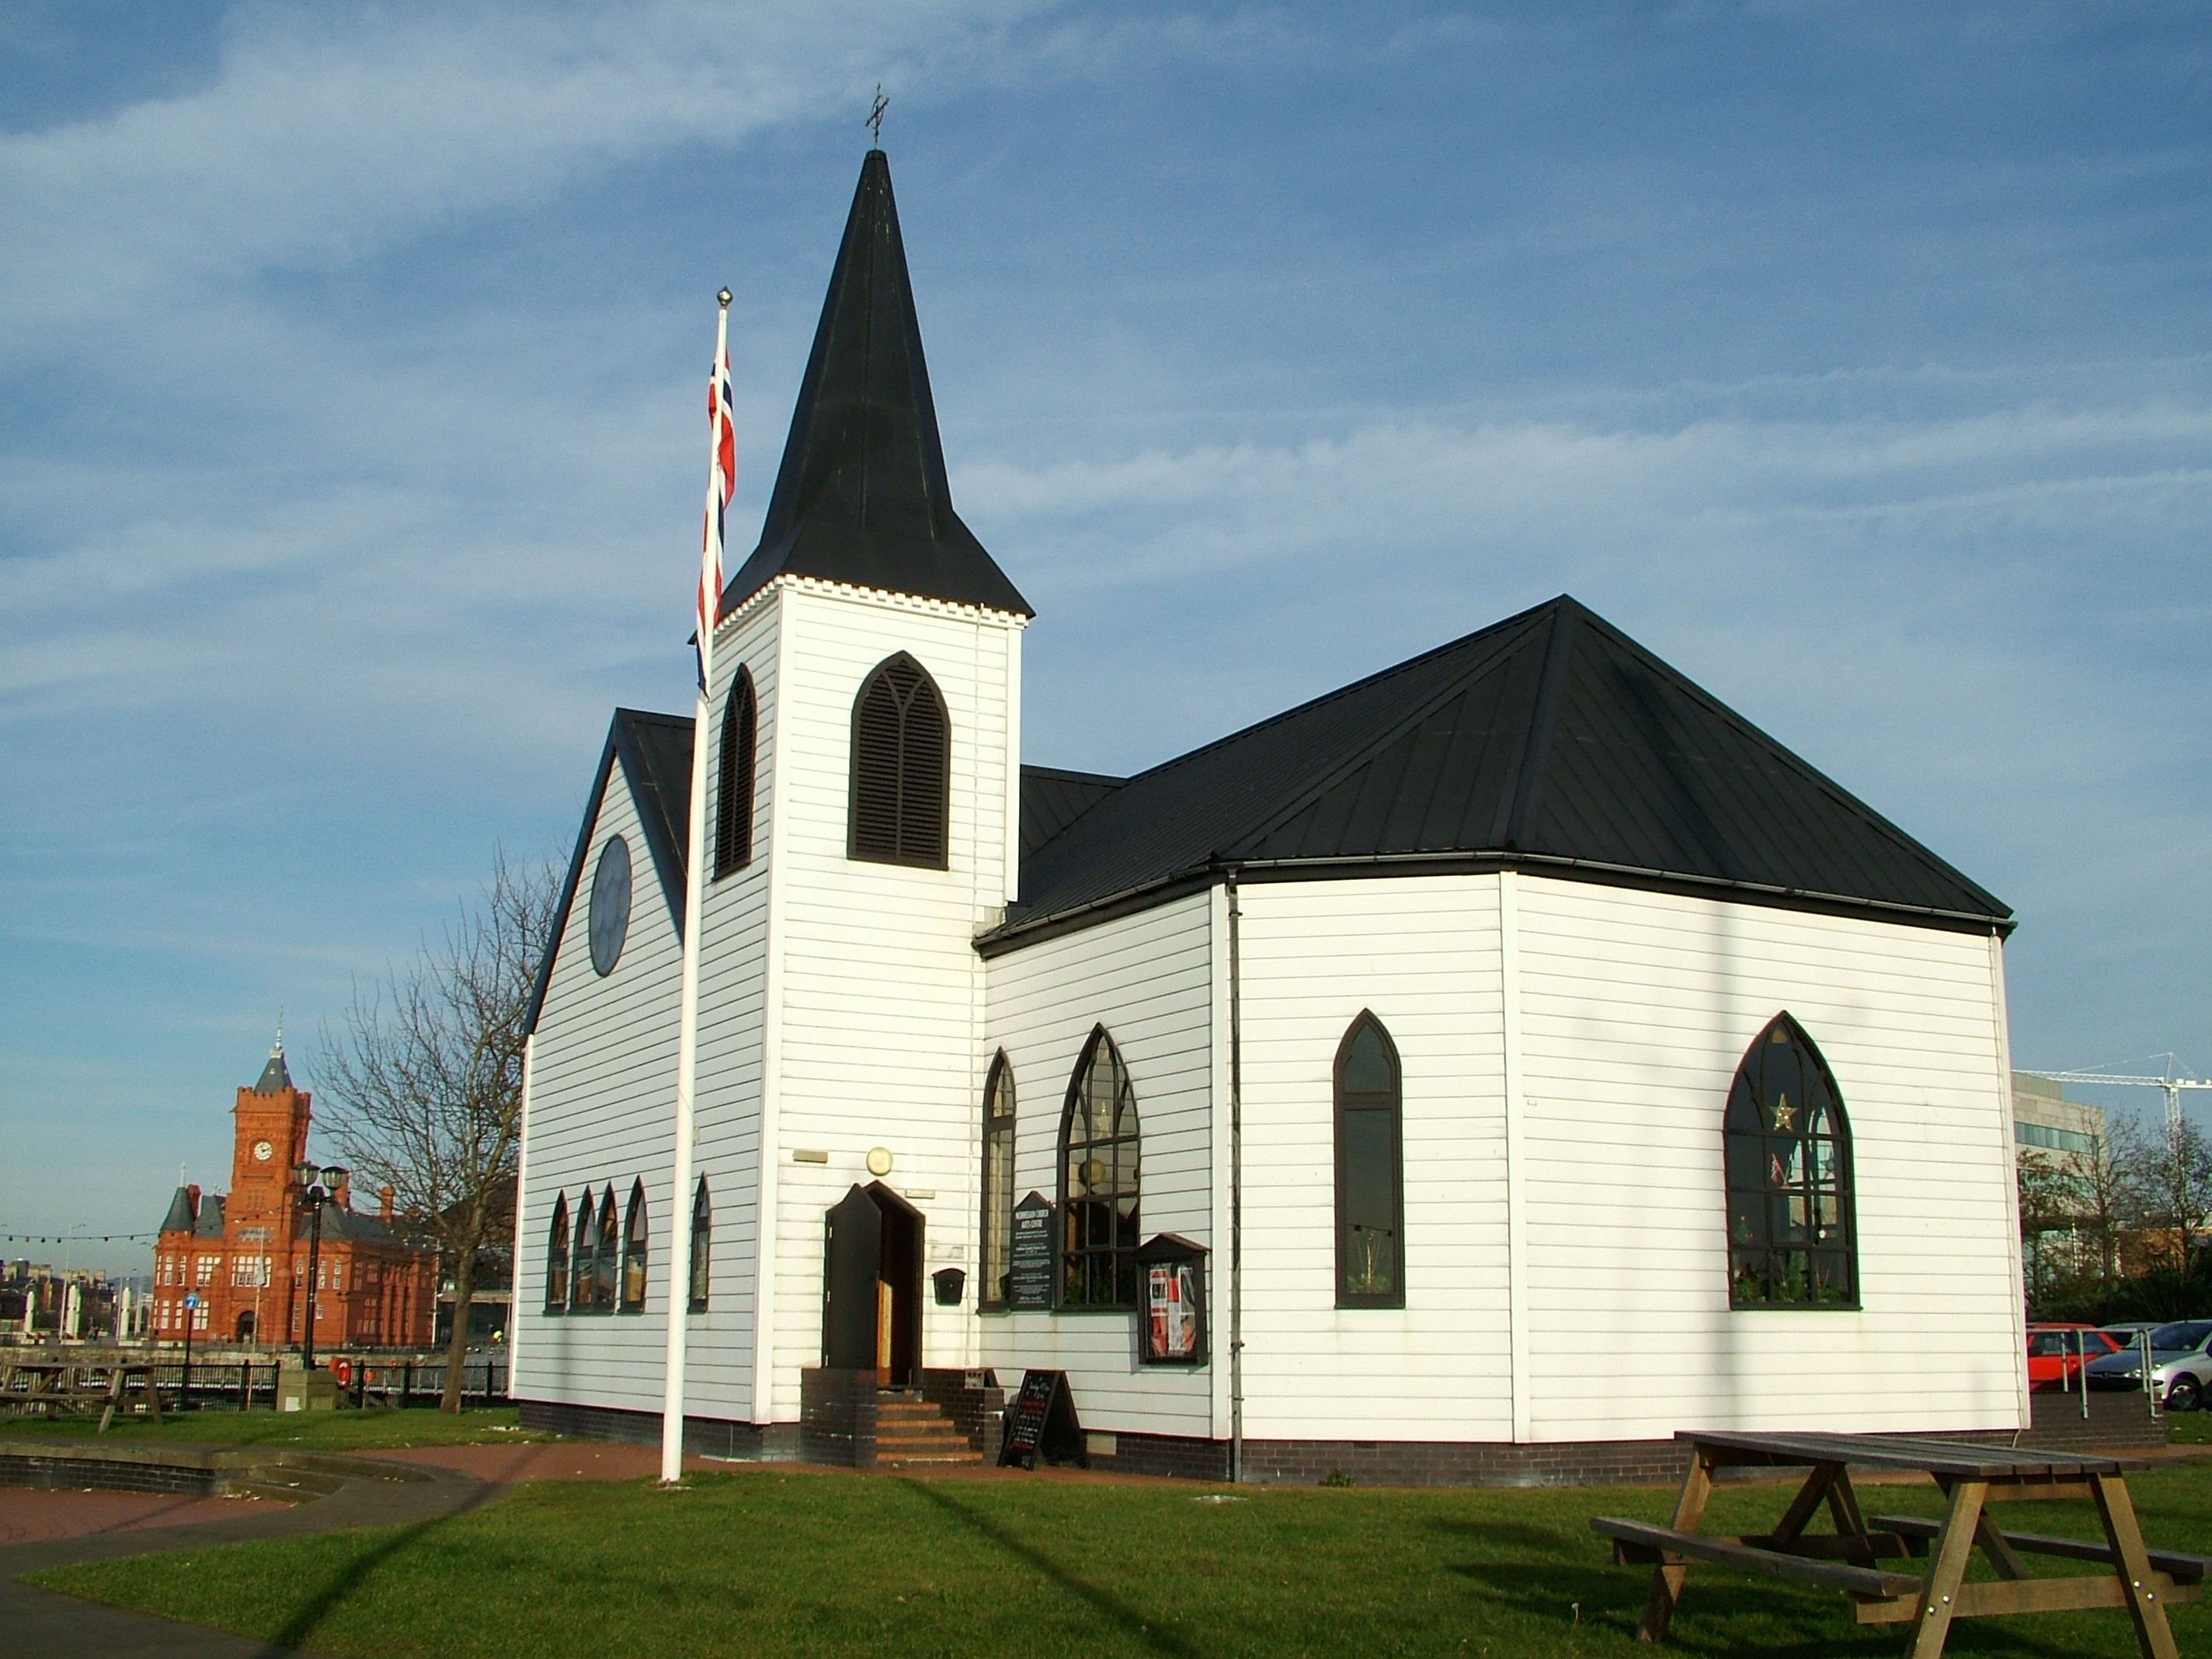 Bevan Foundation will meet at the Norwegian Church to discuss social justice